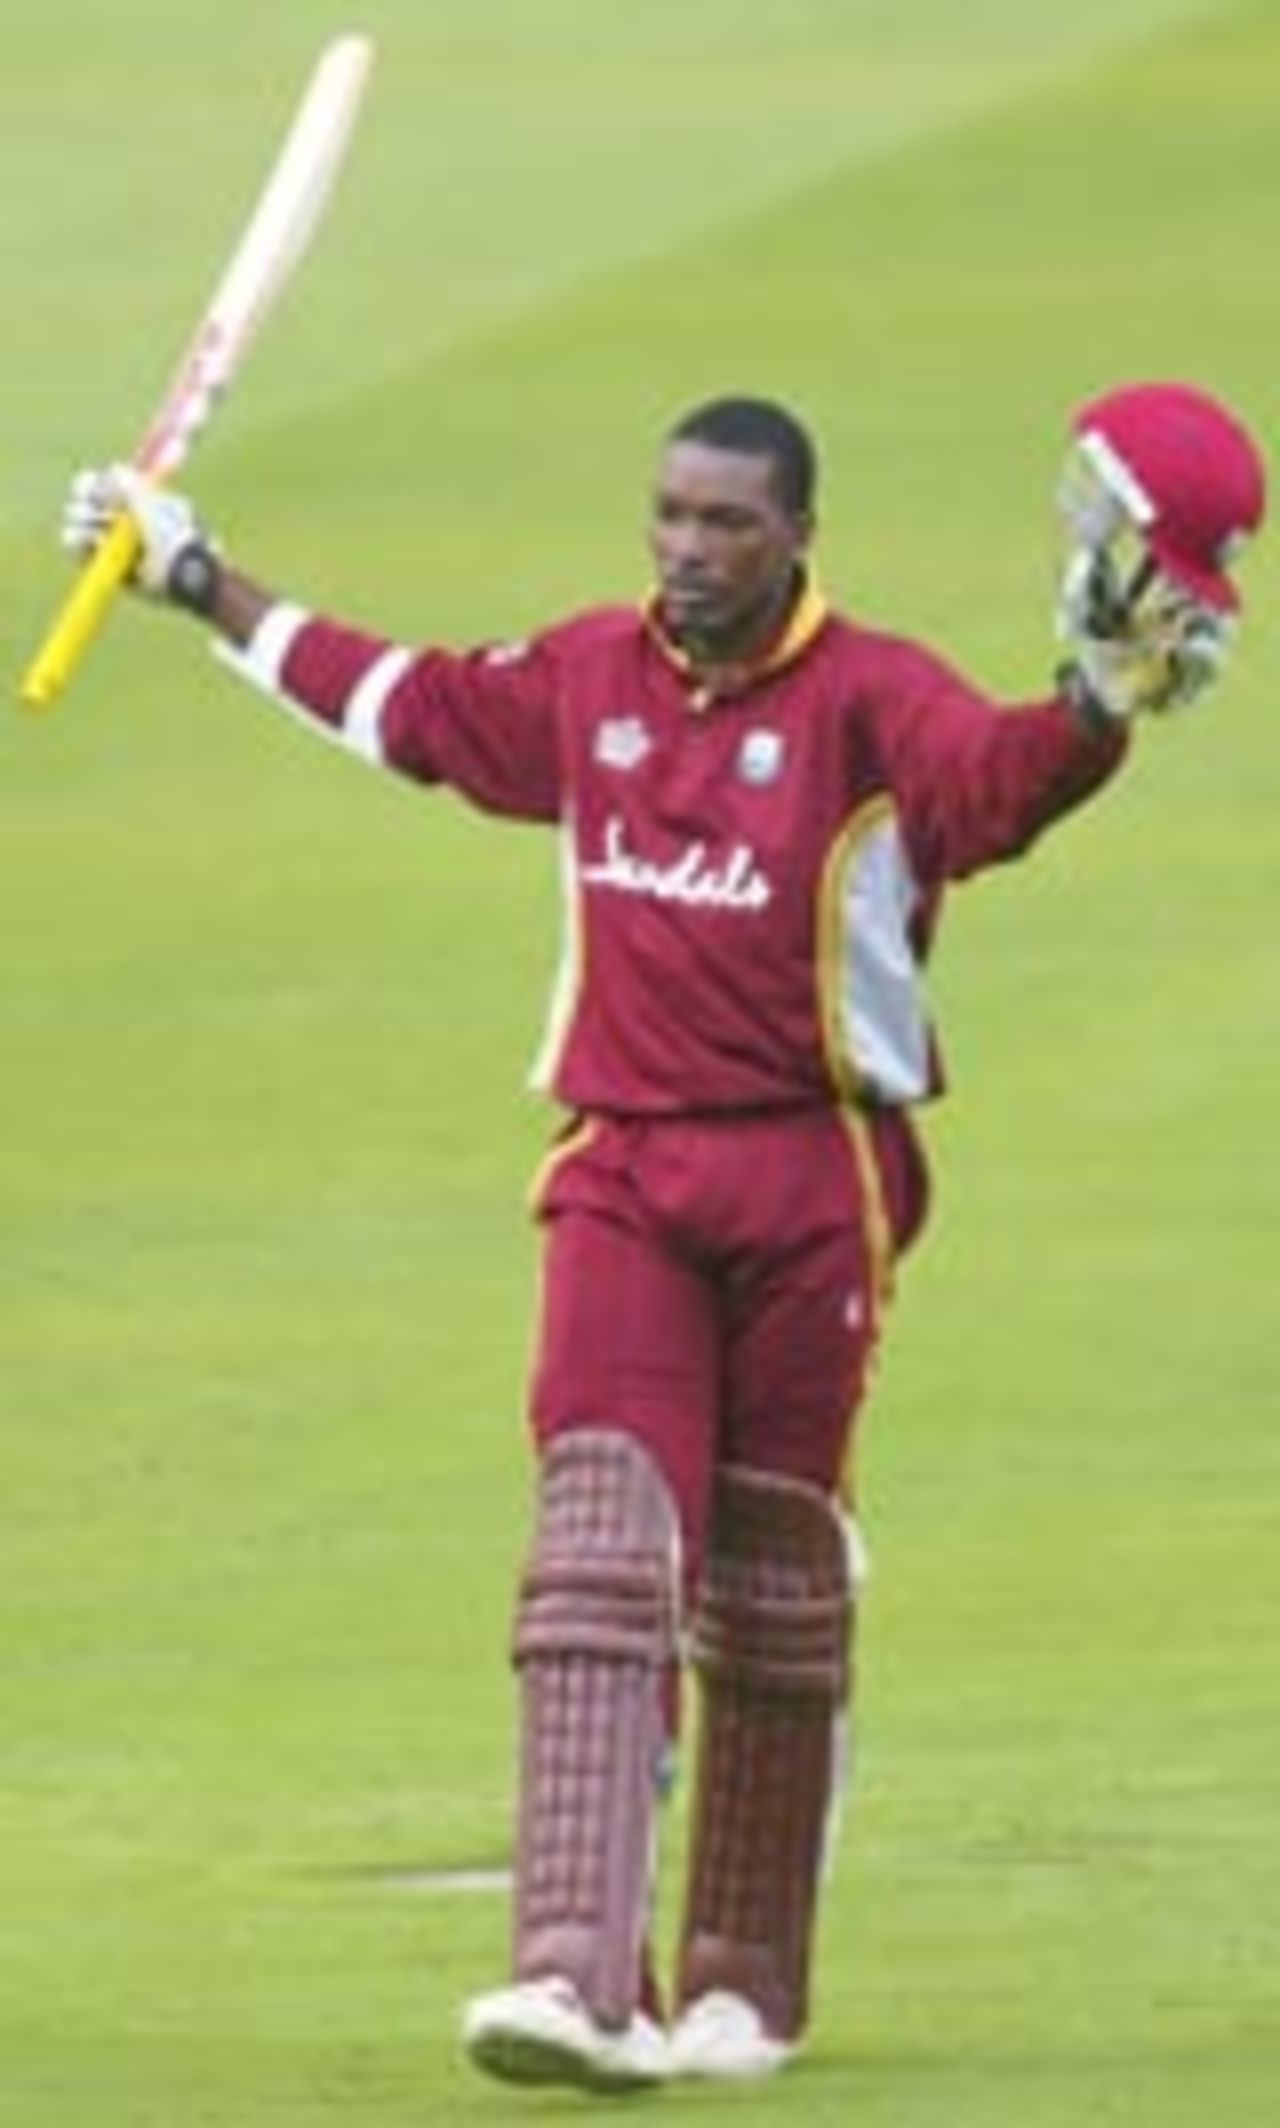 Chris Gayle celebrates his match-winning hundred, England v West Indies, NatWest Series, Lord's, July 6 2004